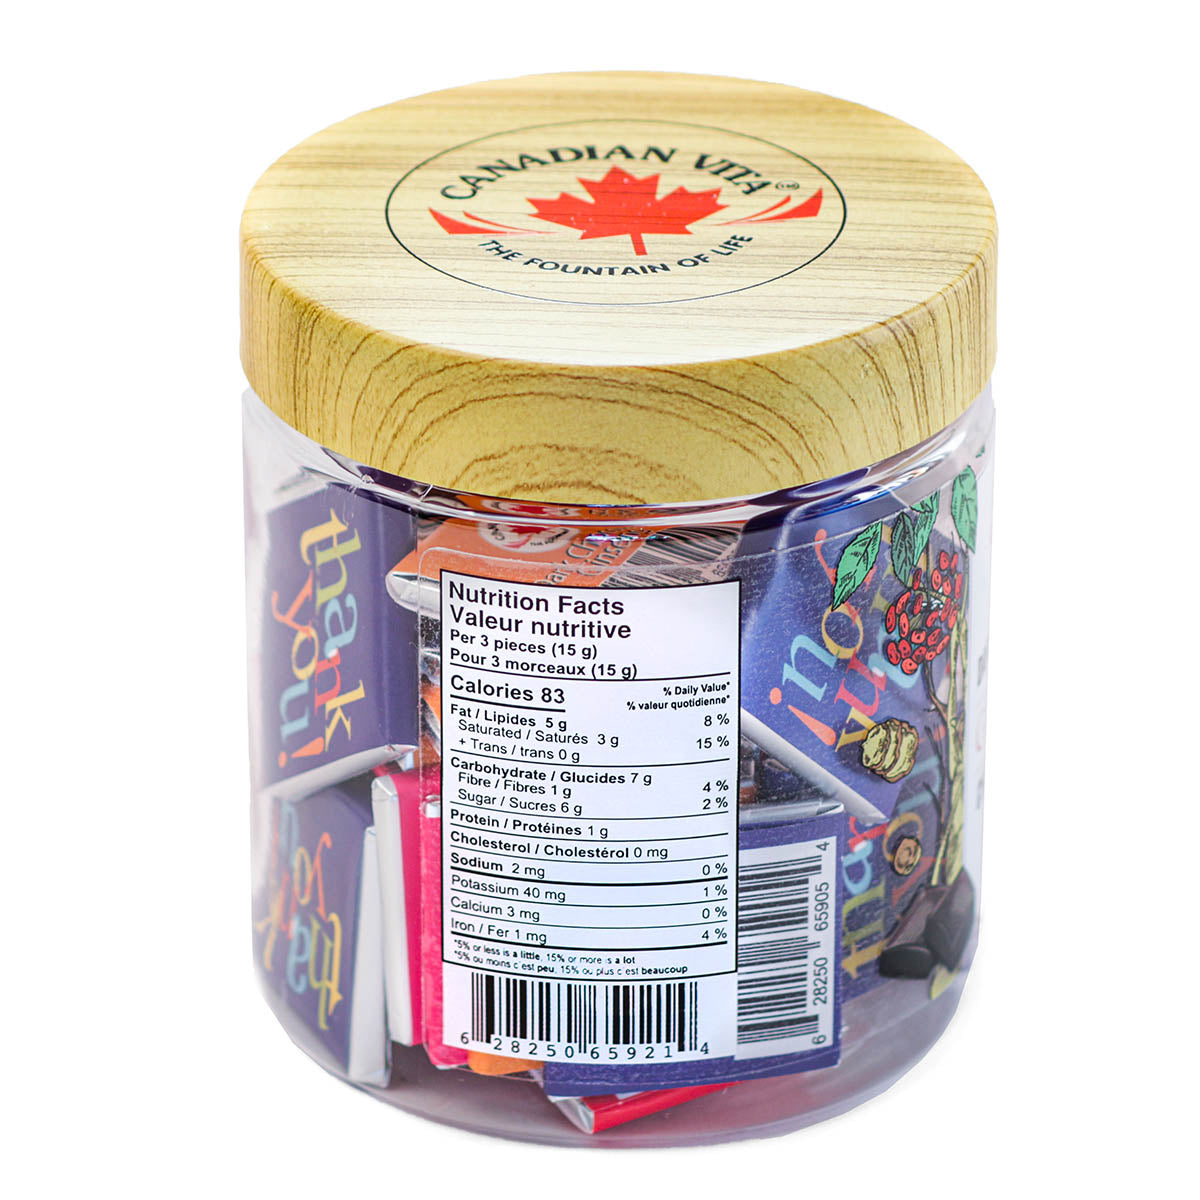 Canadian Vita Ginseng Dark Chocolate - Fall In Love With the Bittersweet Taste of Canada's Ginseng Chocolate - 40 pieces